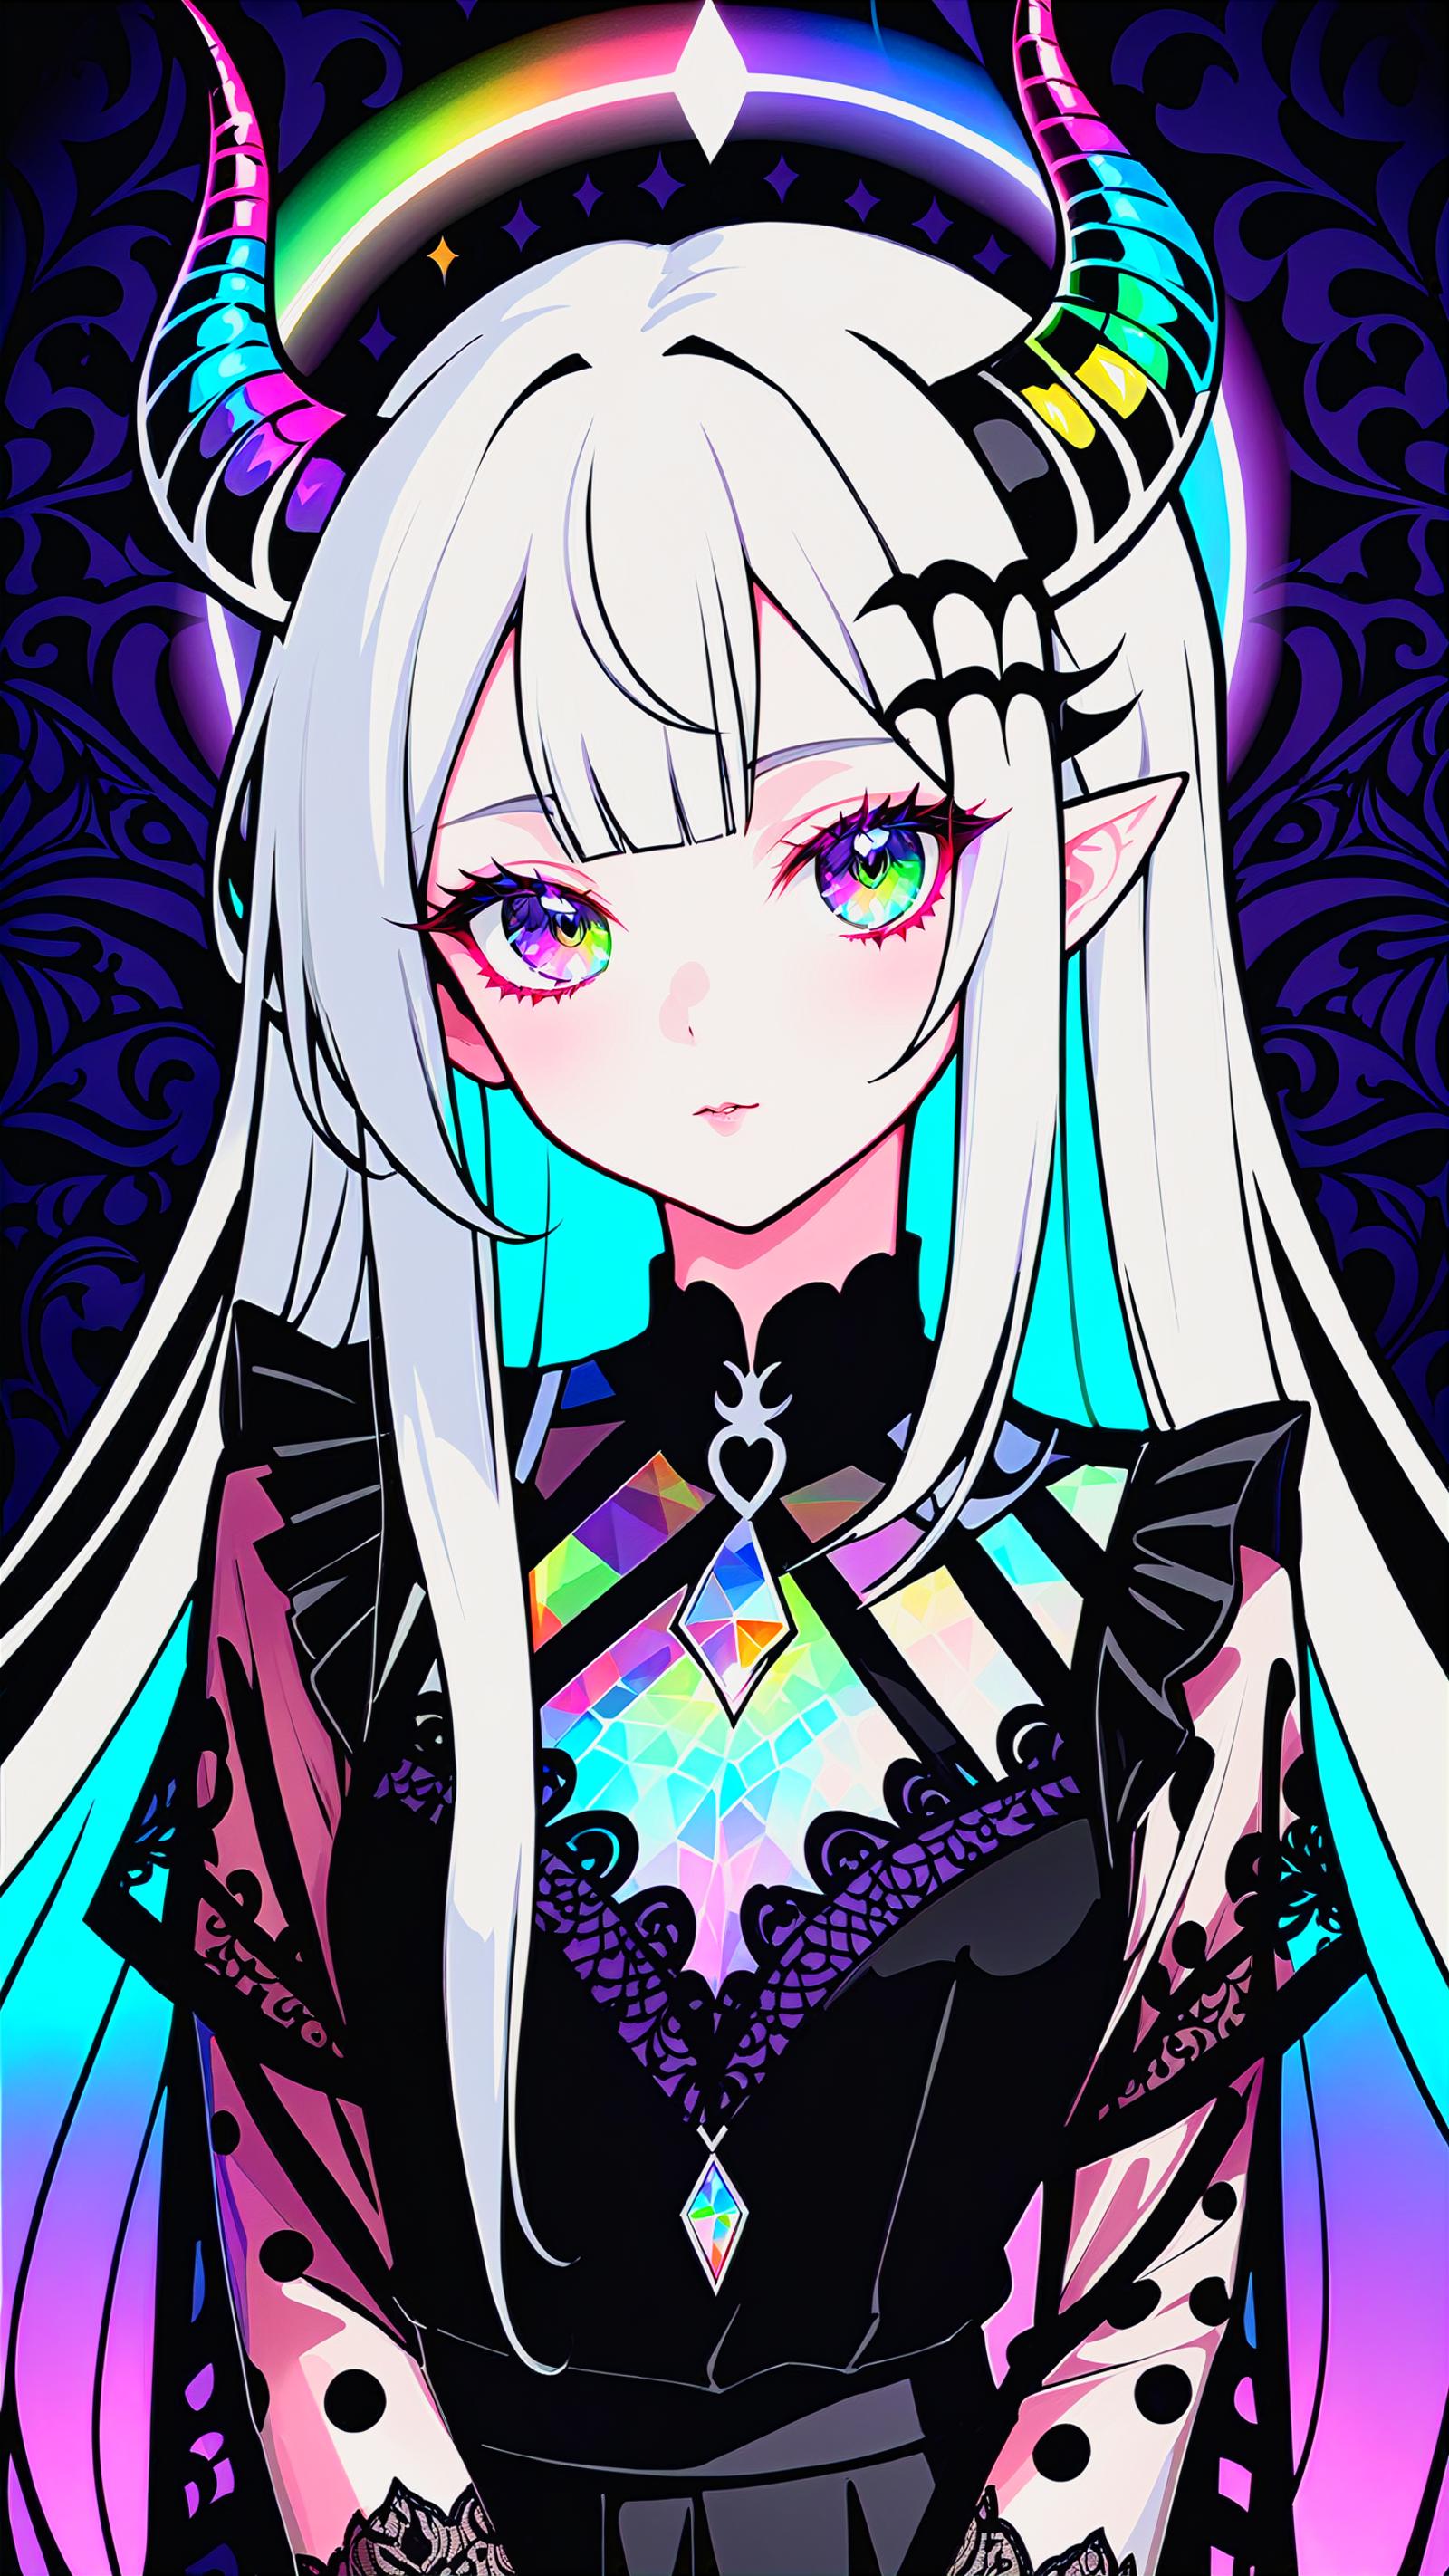 A beautifully drawn anime girl with purple eyes and white hair.